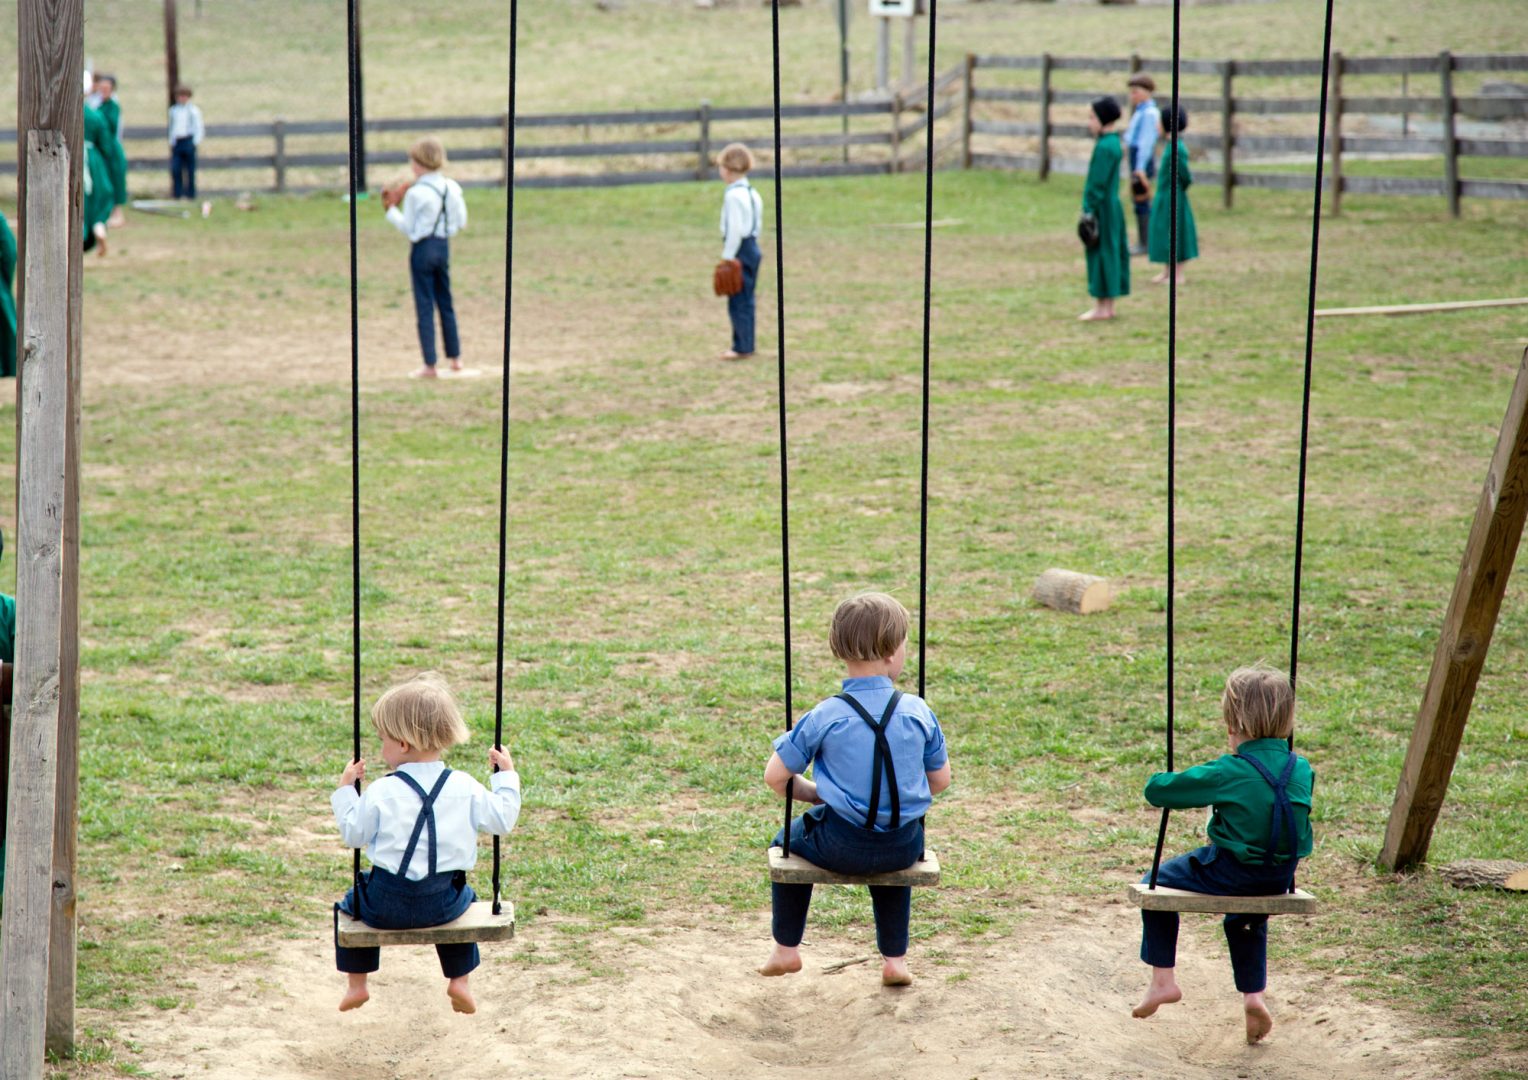 FILE PHOTO: Amish children play in the field outside a schoolhouse in Bergholz, Ohio on April 9, 2013.